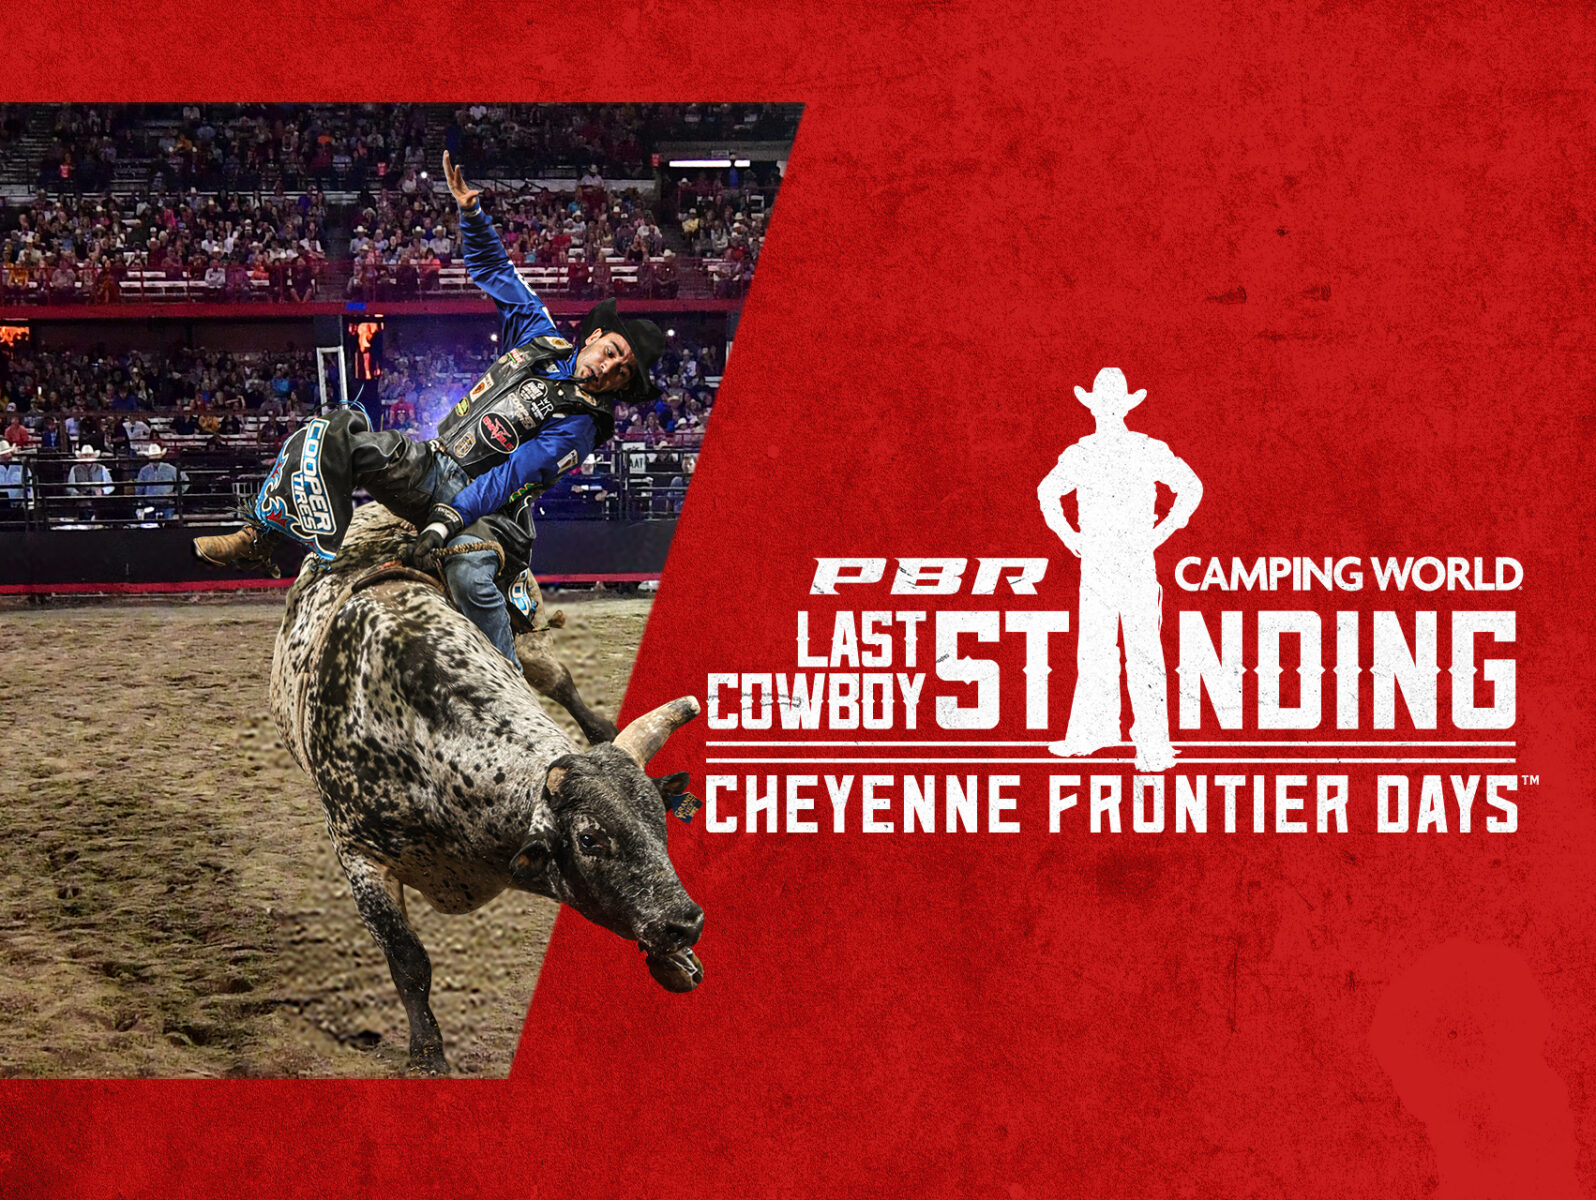 Camping World PBR <br> Last Cowboy Standing banner image.